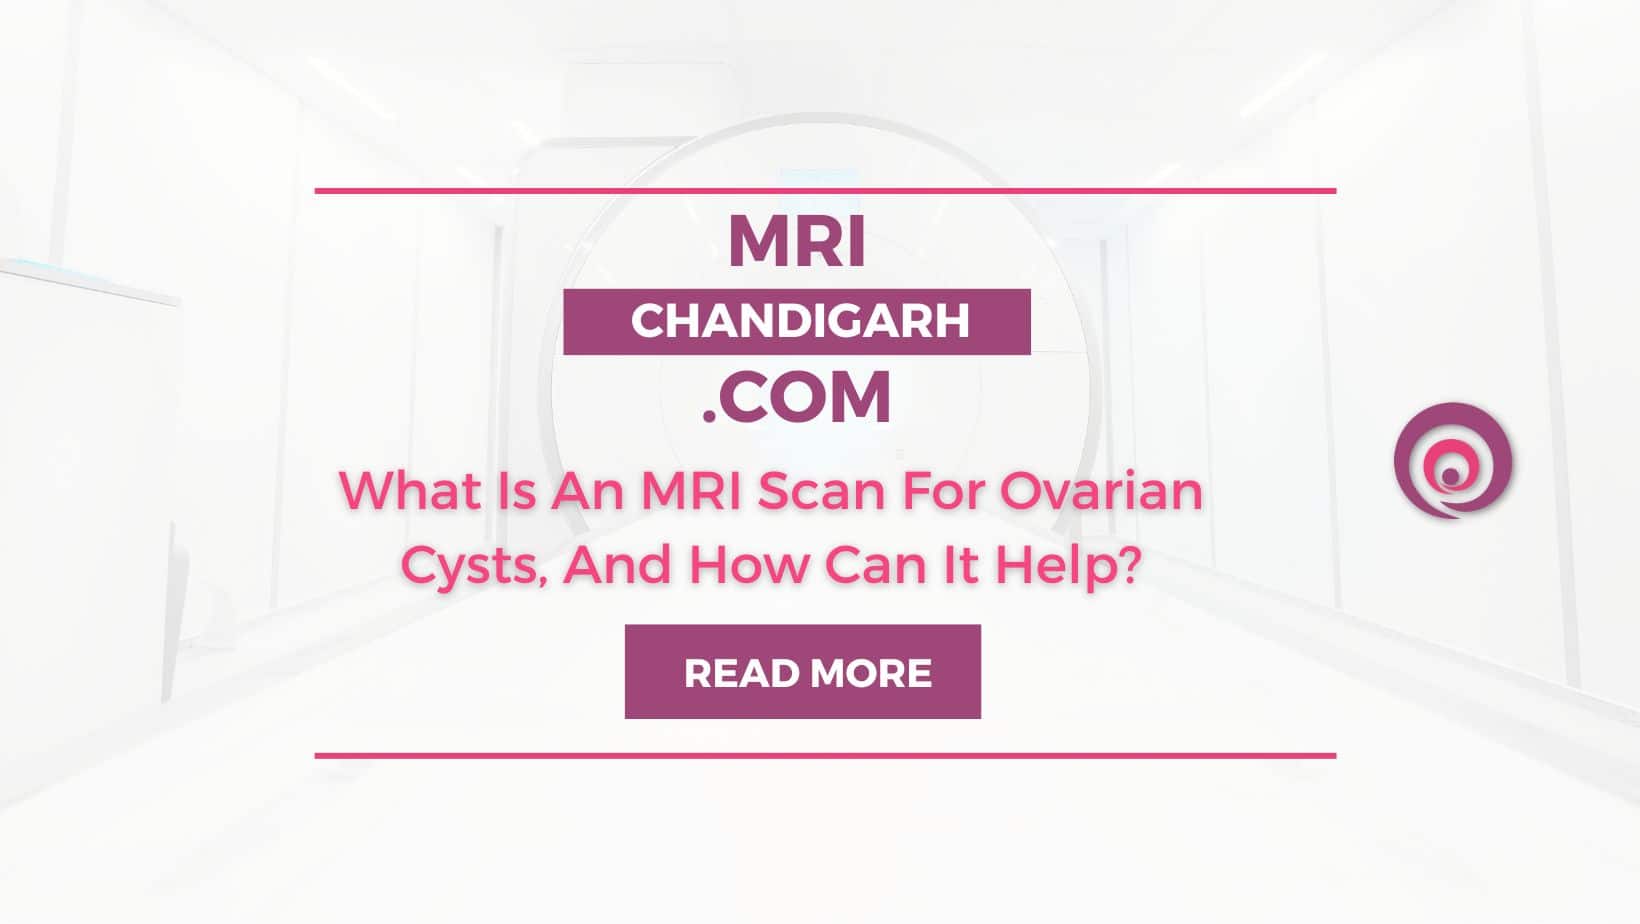 What Is An MRI Scan For Ovarian Cysts, And How Can It Help?